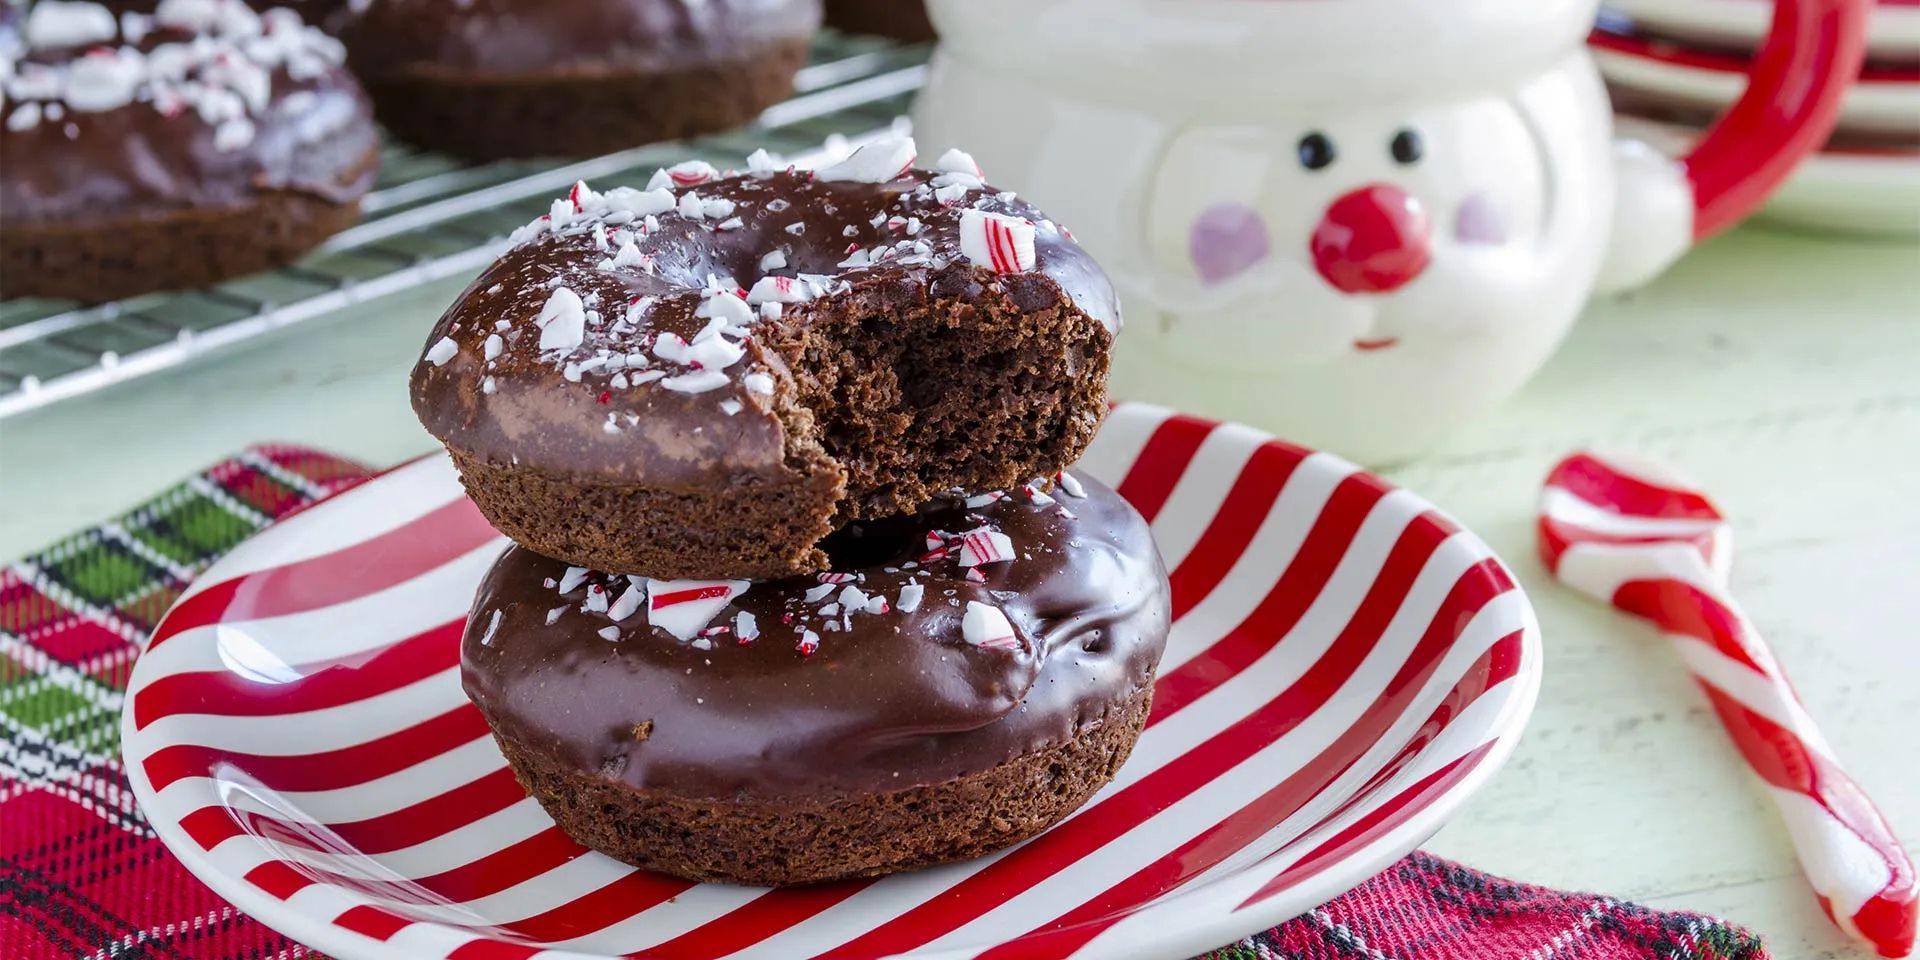 Chocolate donuts with candy cane sprinkles.